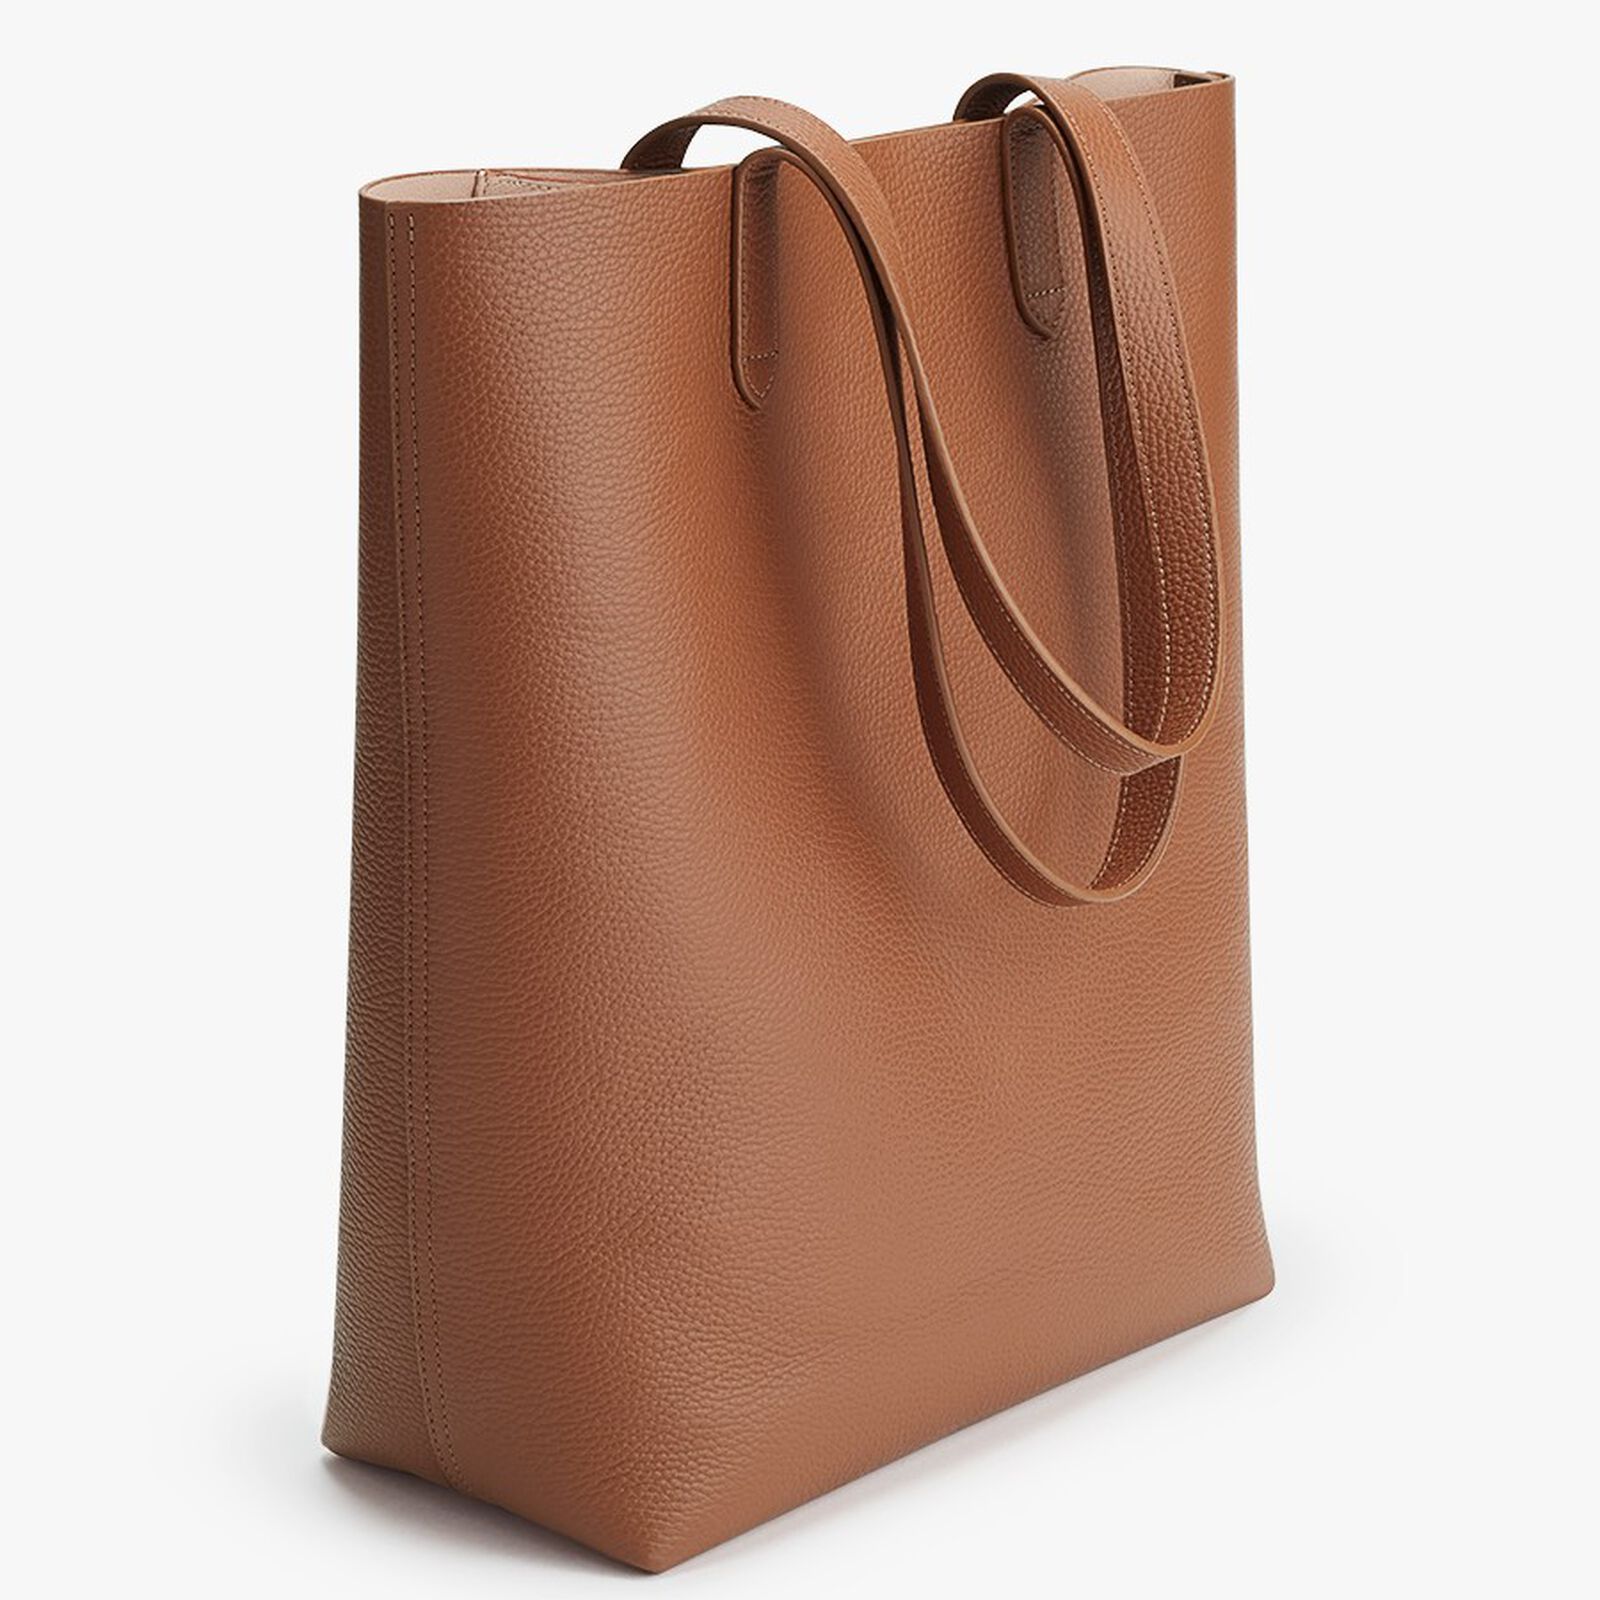 Tall Structured Leather Tote | Cuyana